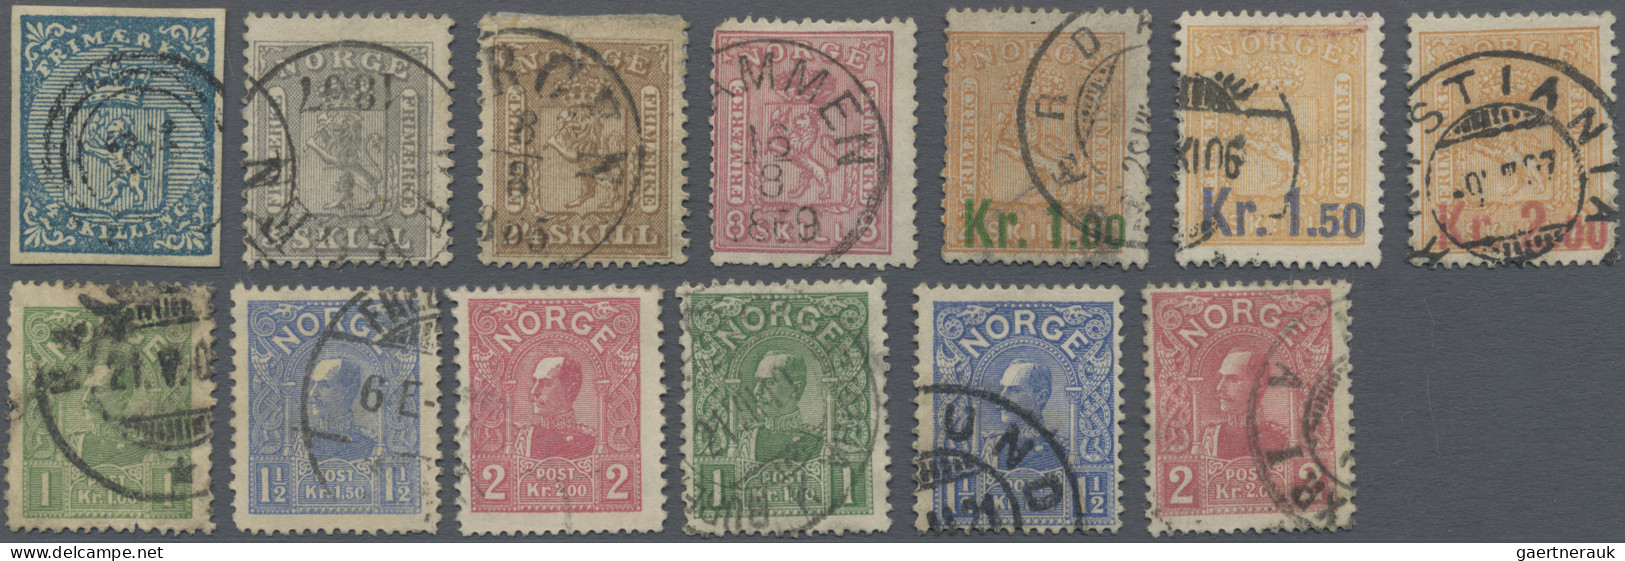 Norway: 1855/1909, Fine Used Lot Of 13 Stamps Incl. Michel Nos. 1, 7, 10, 15, 62 - Usati